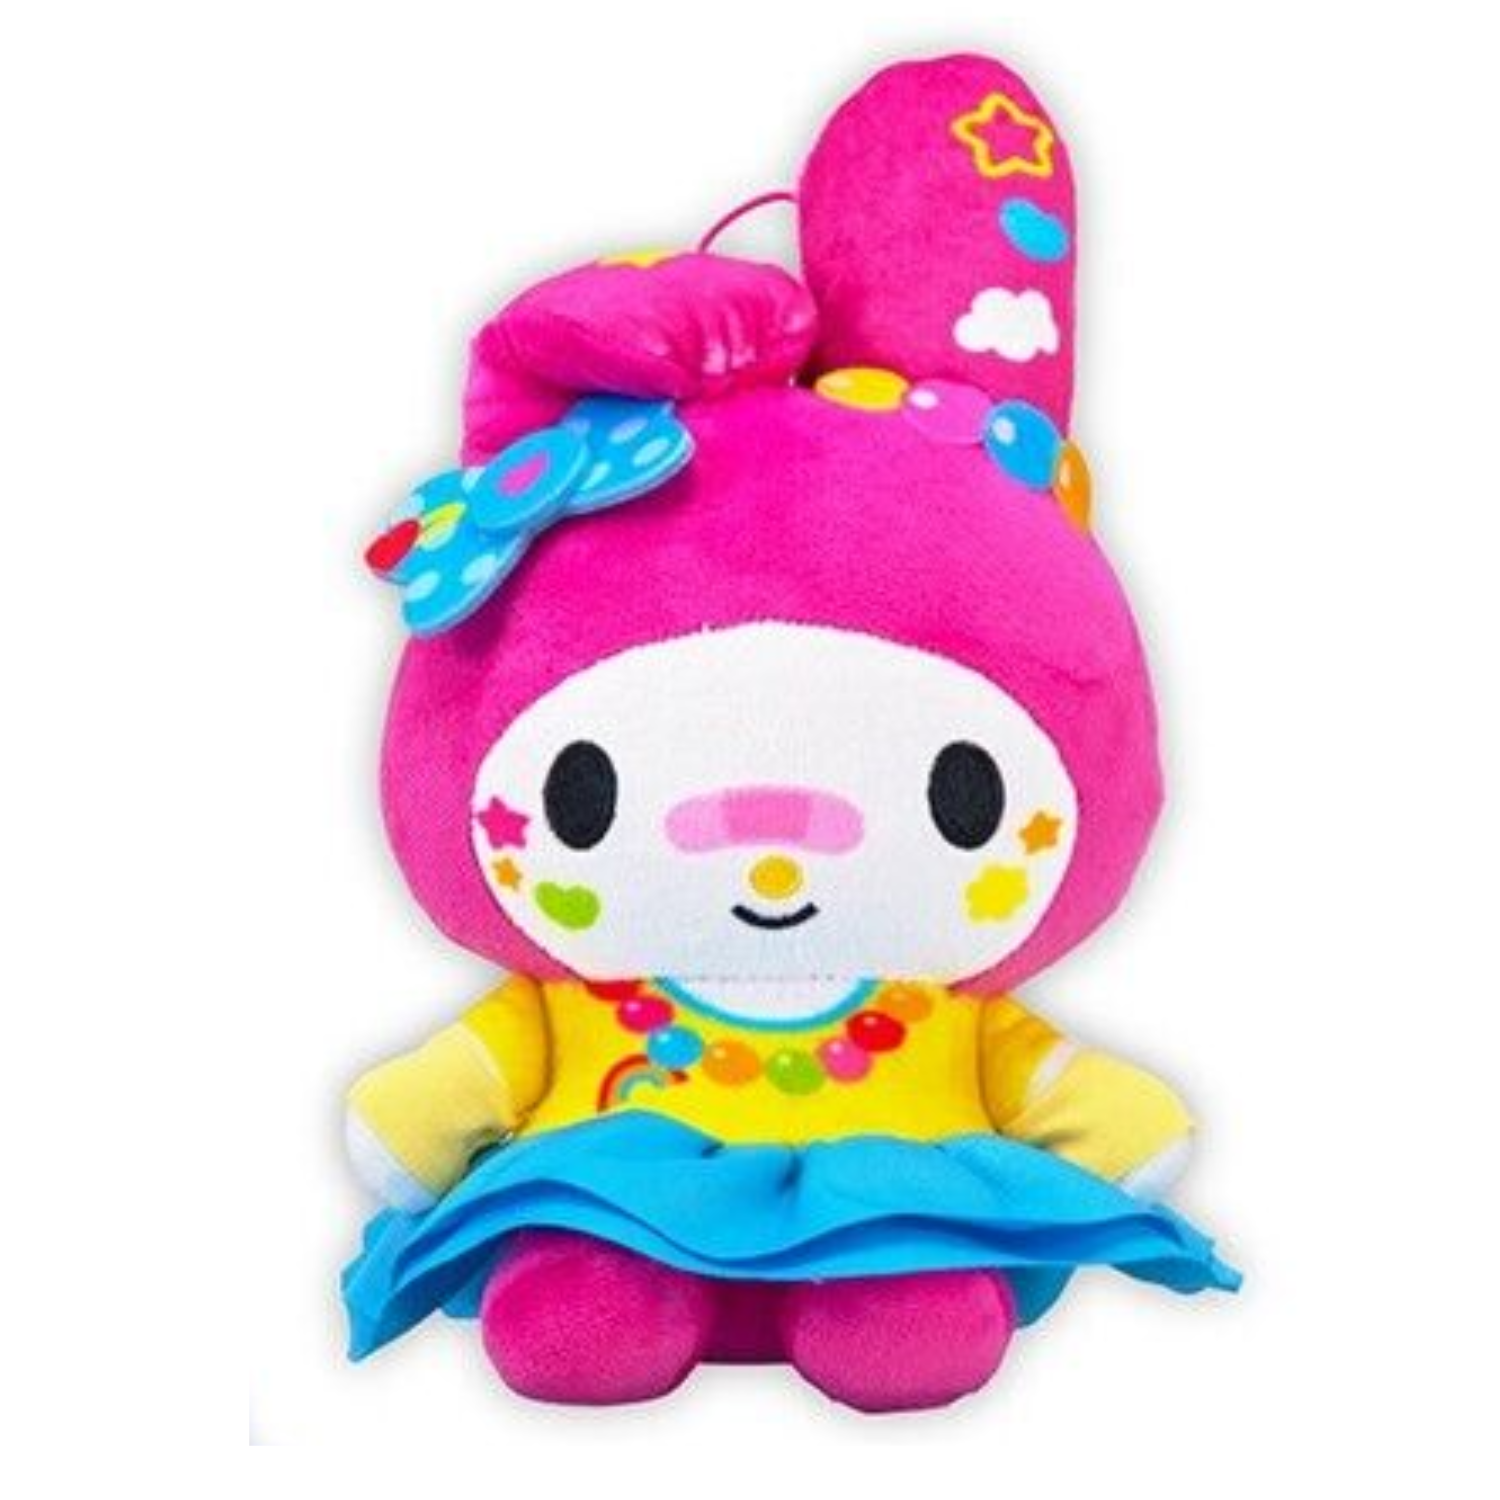 A colorful My Melody plush with several colorful "stickers" on her face and a pink band-aid. She has several charms and bows on her hood, and is wearing a yelow and blue dress with a rainbow necklace.